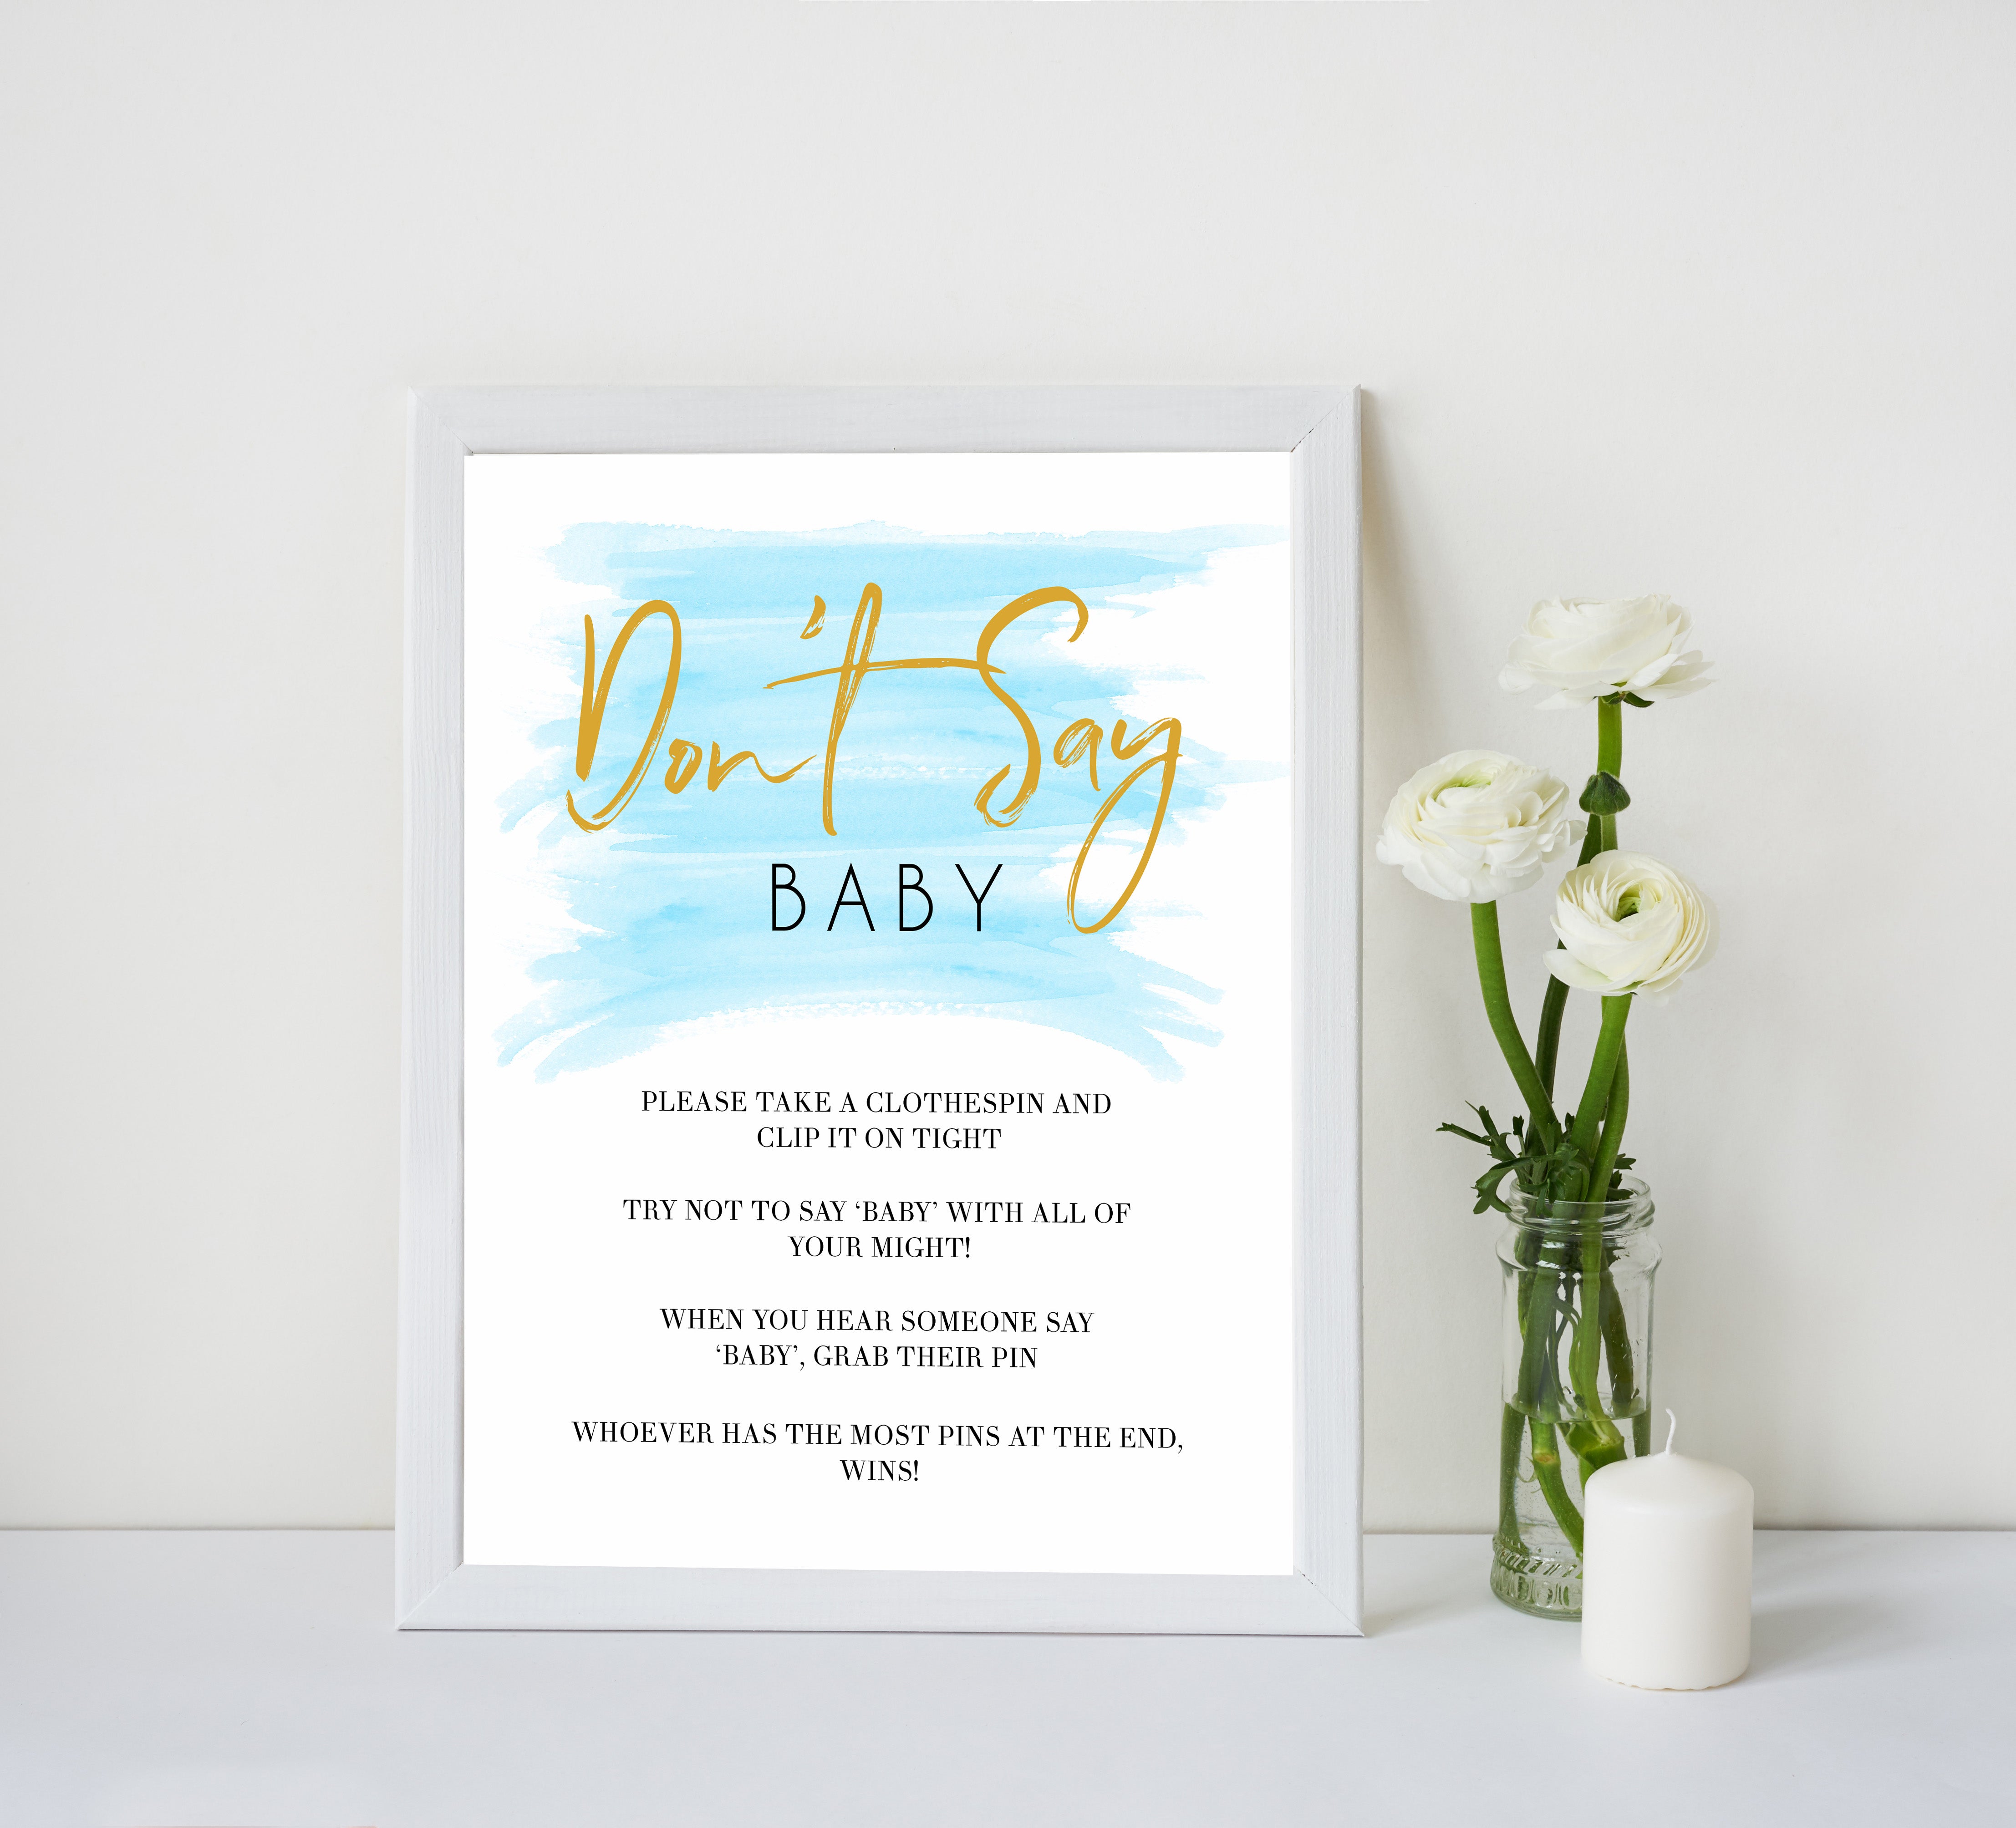 Blue swash, dont say baby baby games, baby shower games, printable baby games, fun baby games, boy baby shower games, baby games, fun baby shower ideas, baby shower ideas, boy baby games, blue baby shower